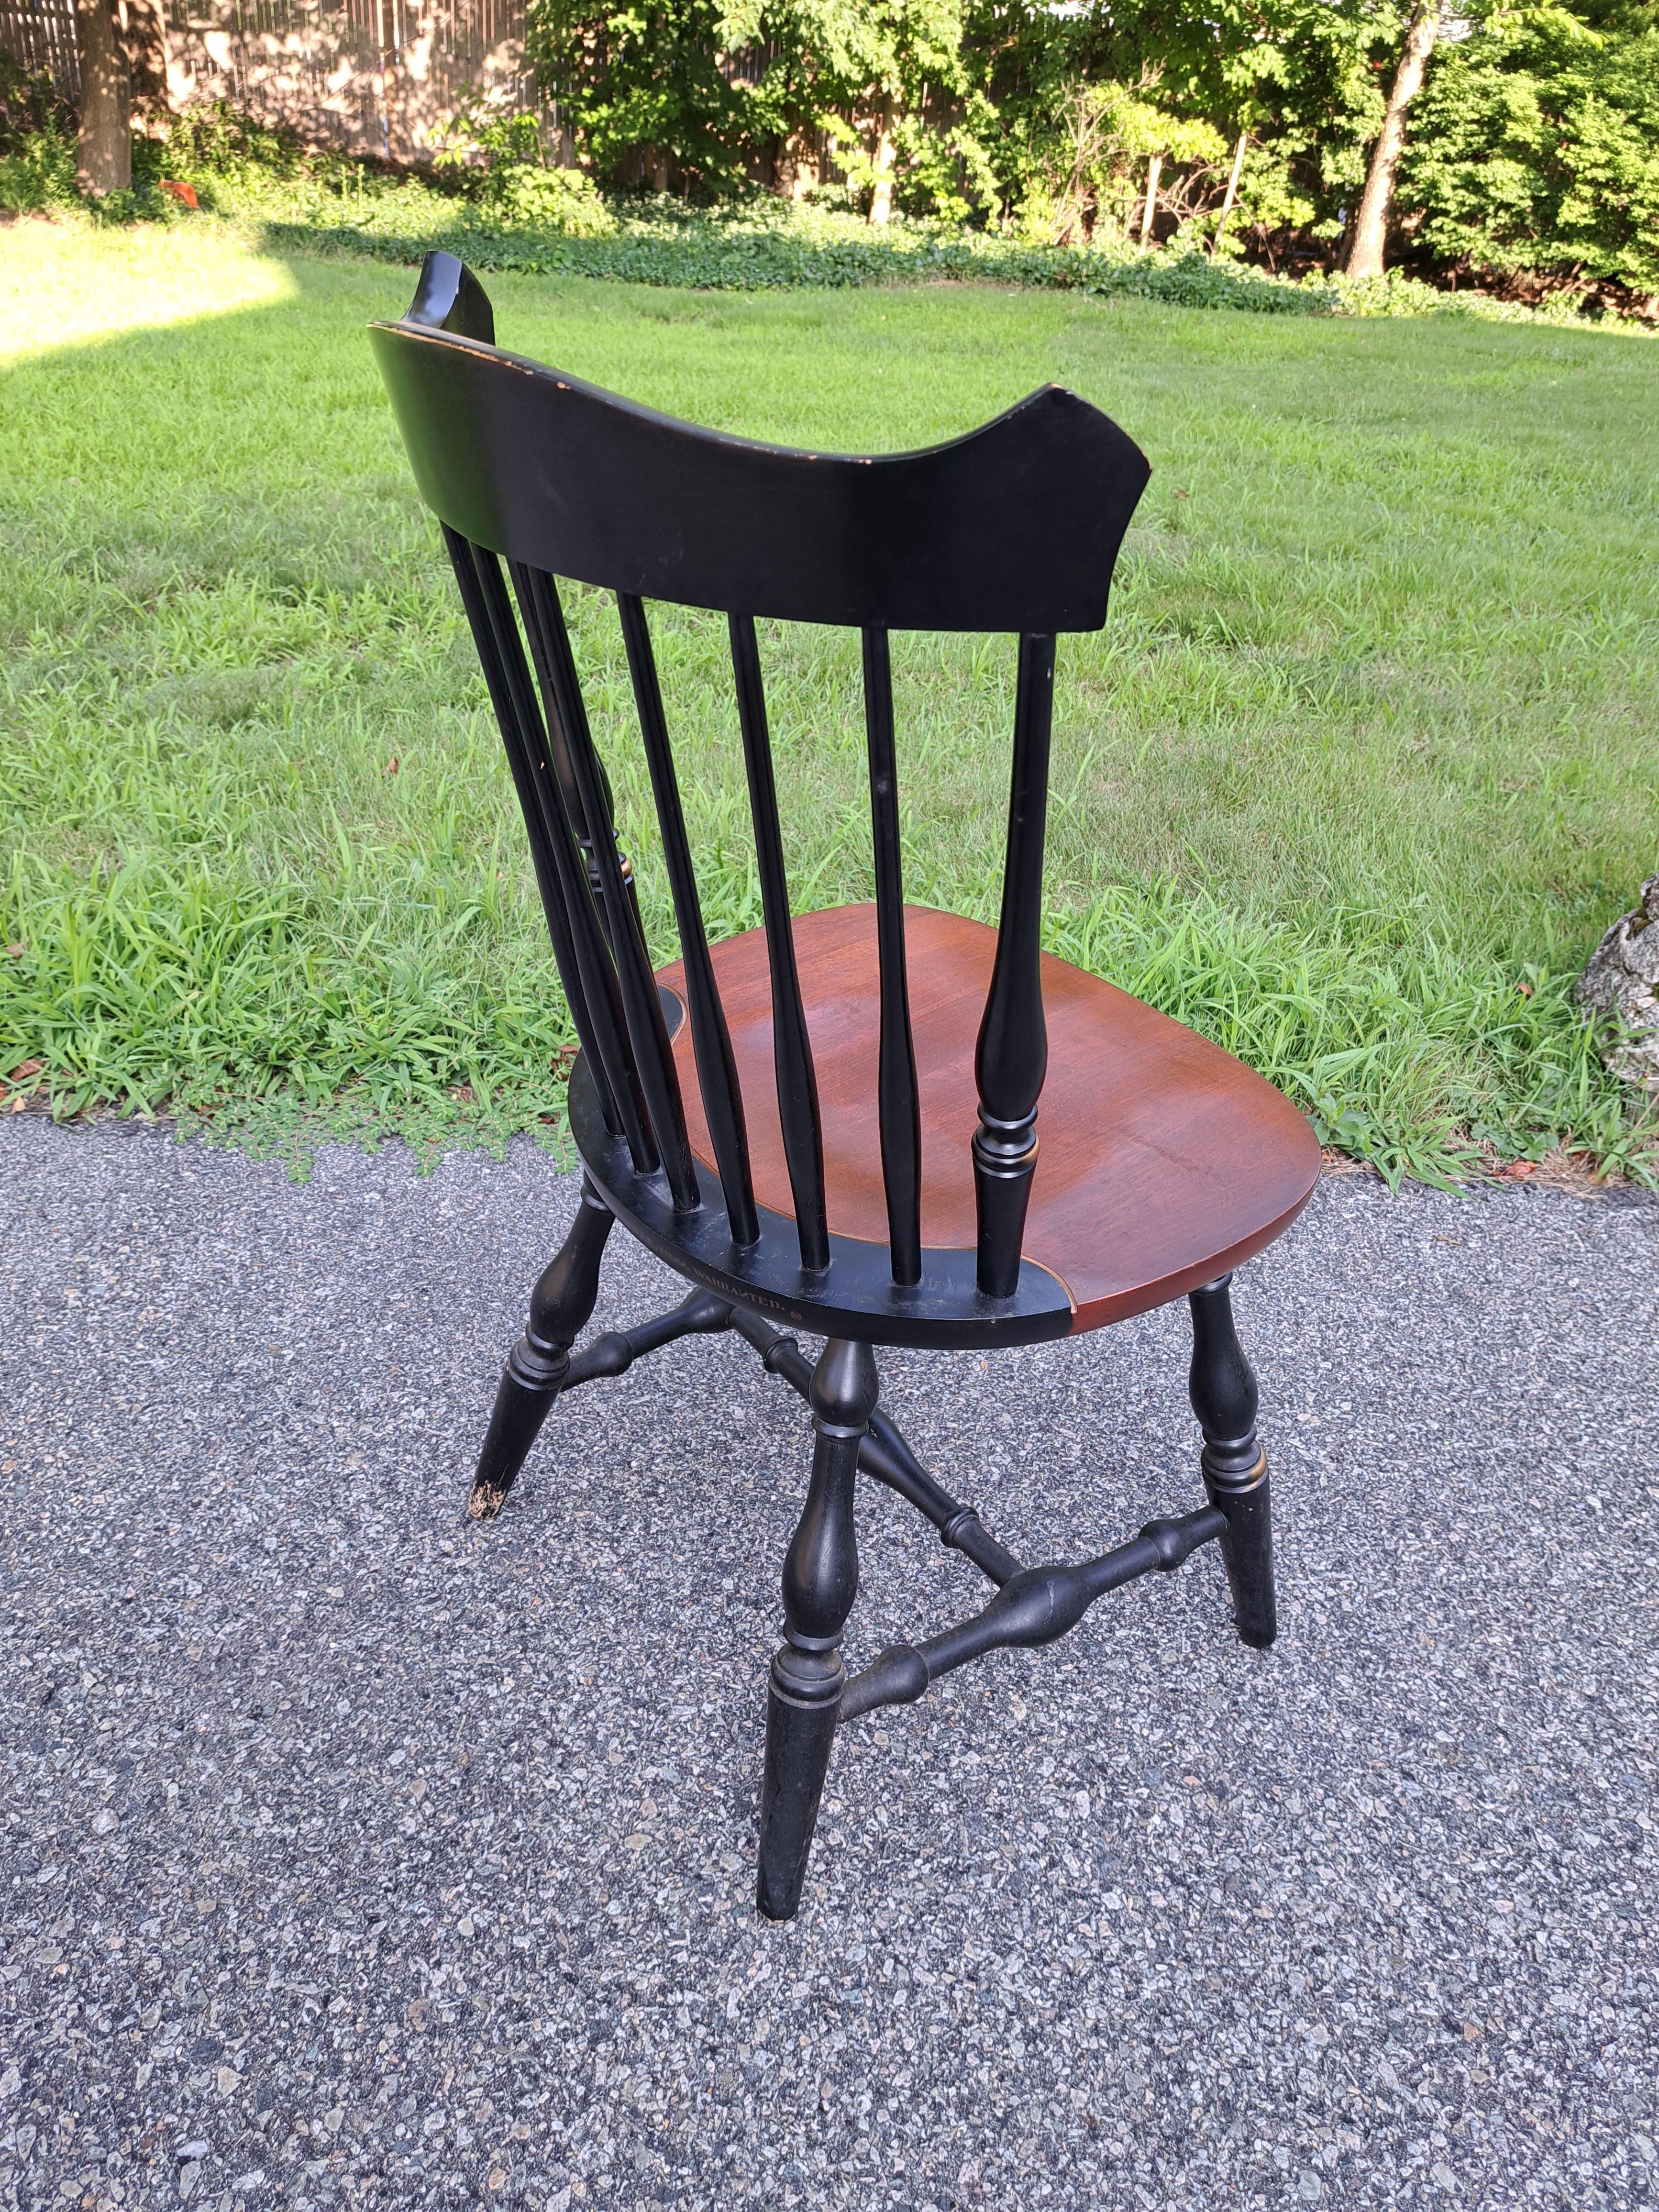 Set of four solid maple Hitchcock Furniture Co. Windsor style dining chairs including two captains chairs with arms and two without arms. Beautiful set with the maker's name stenciled in gold on the back of each seat.